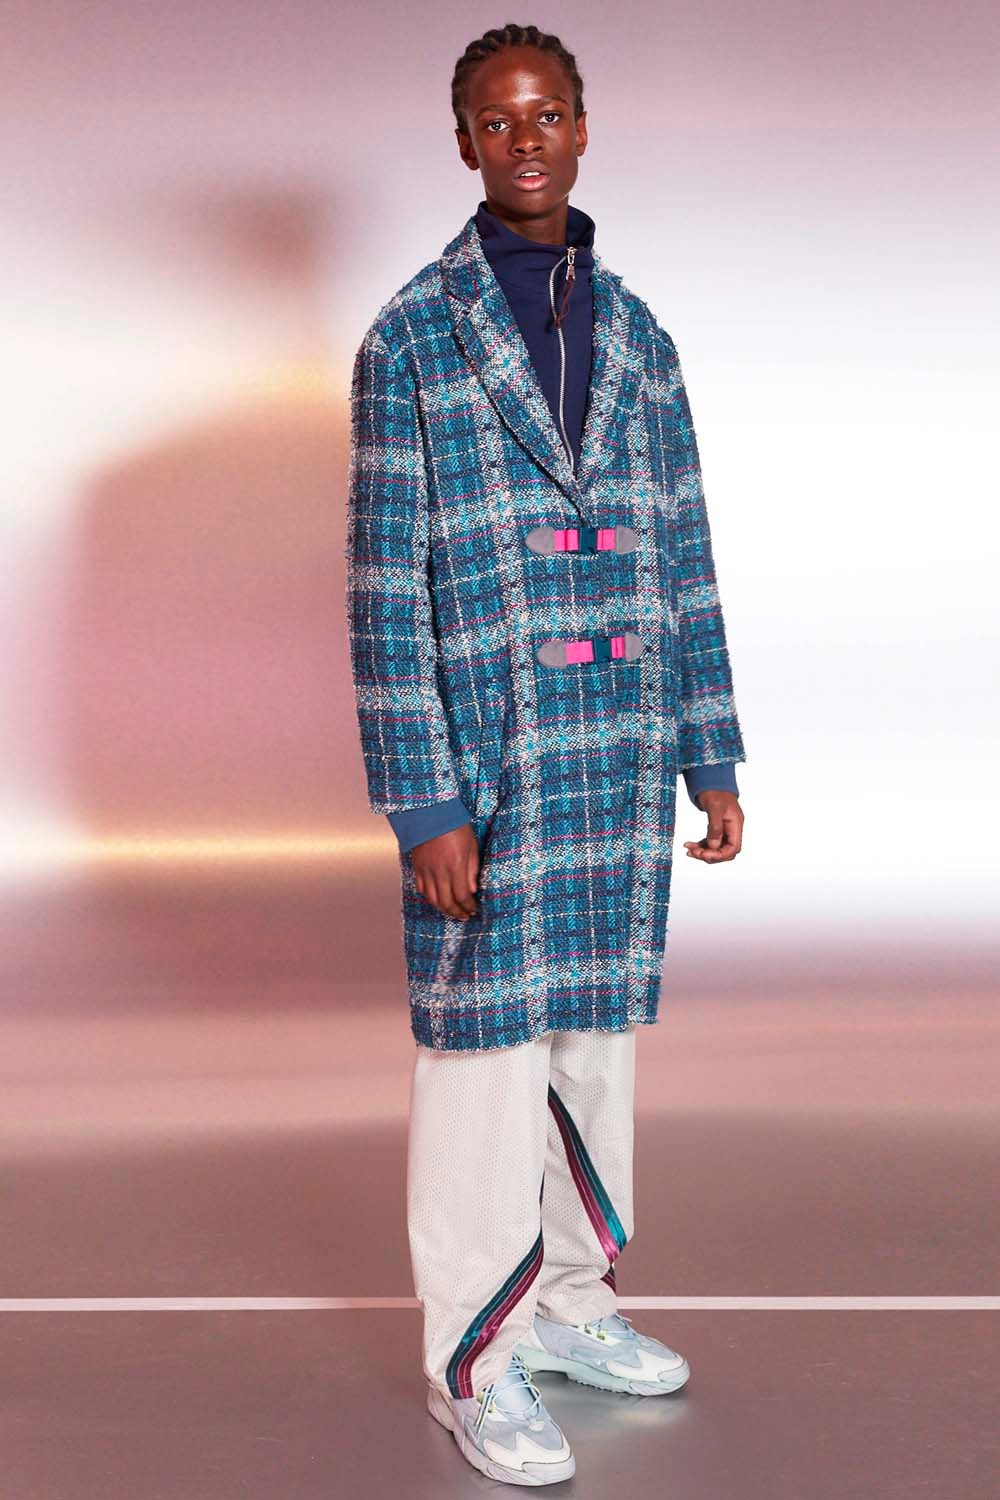 Pigalle Fall Winter 2019 Collection paris fashion week men's mens hotel loungewear robes bathrobe basketball bop ppp Journey of thoughts